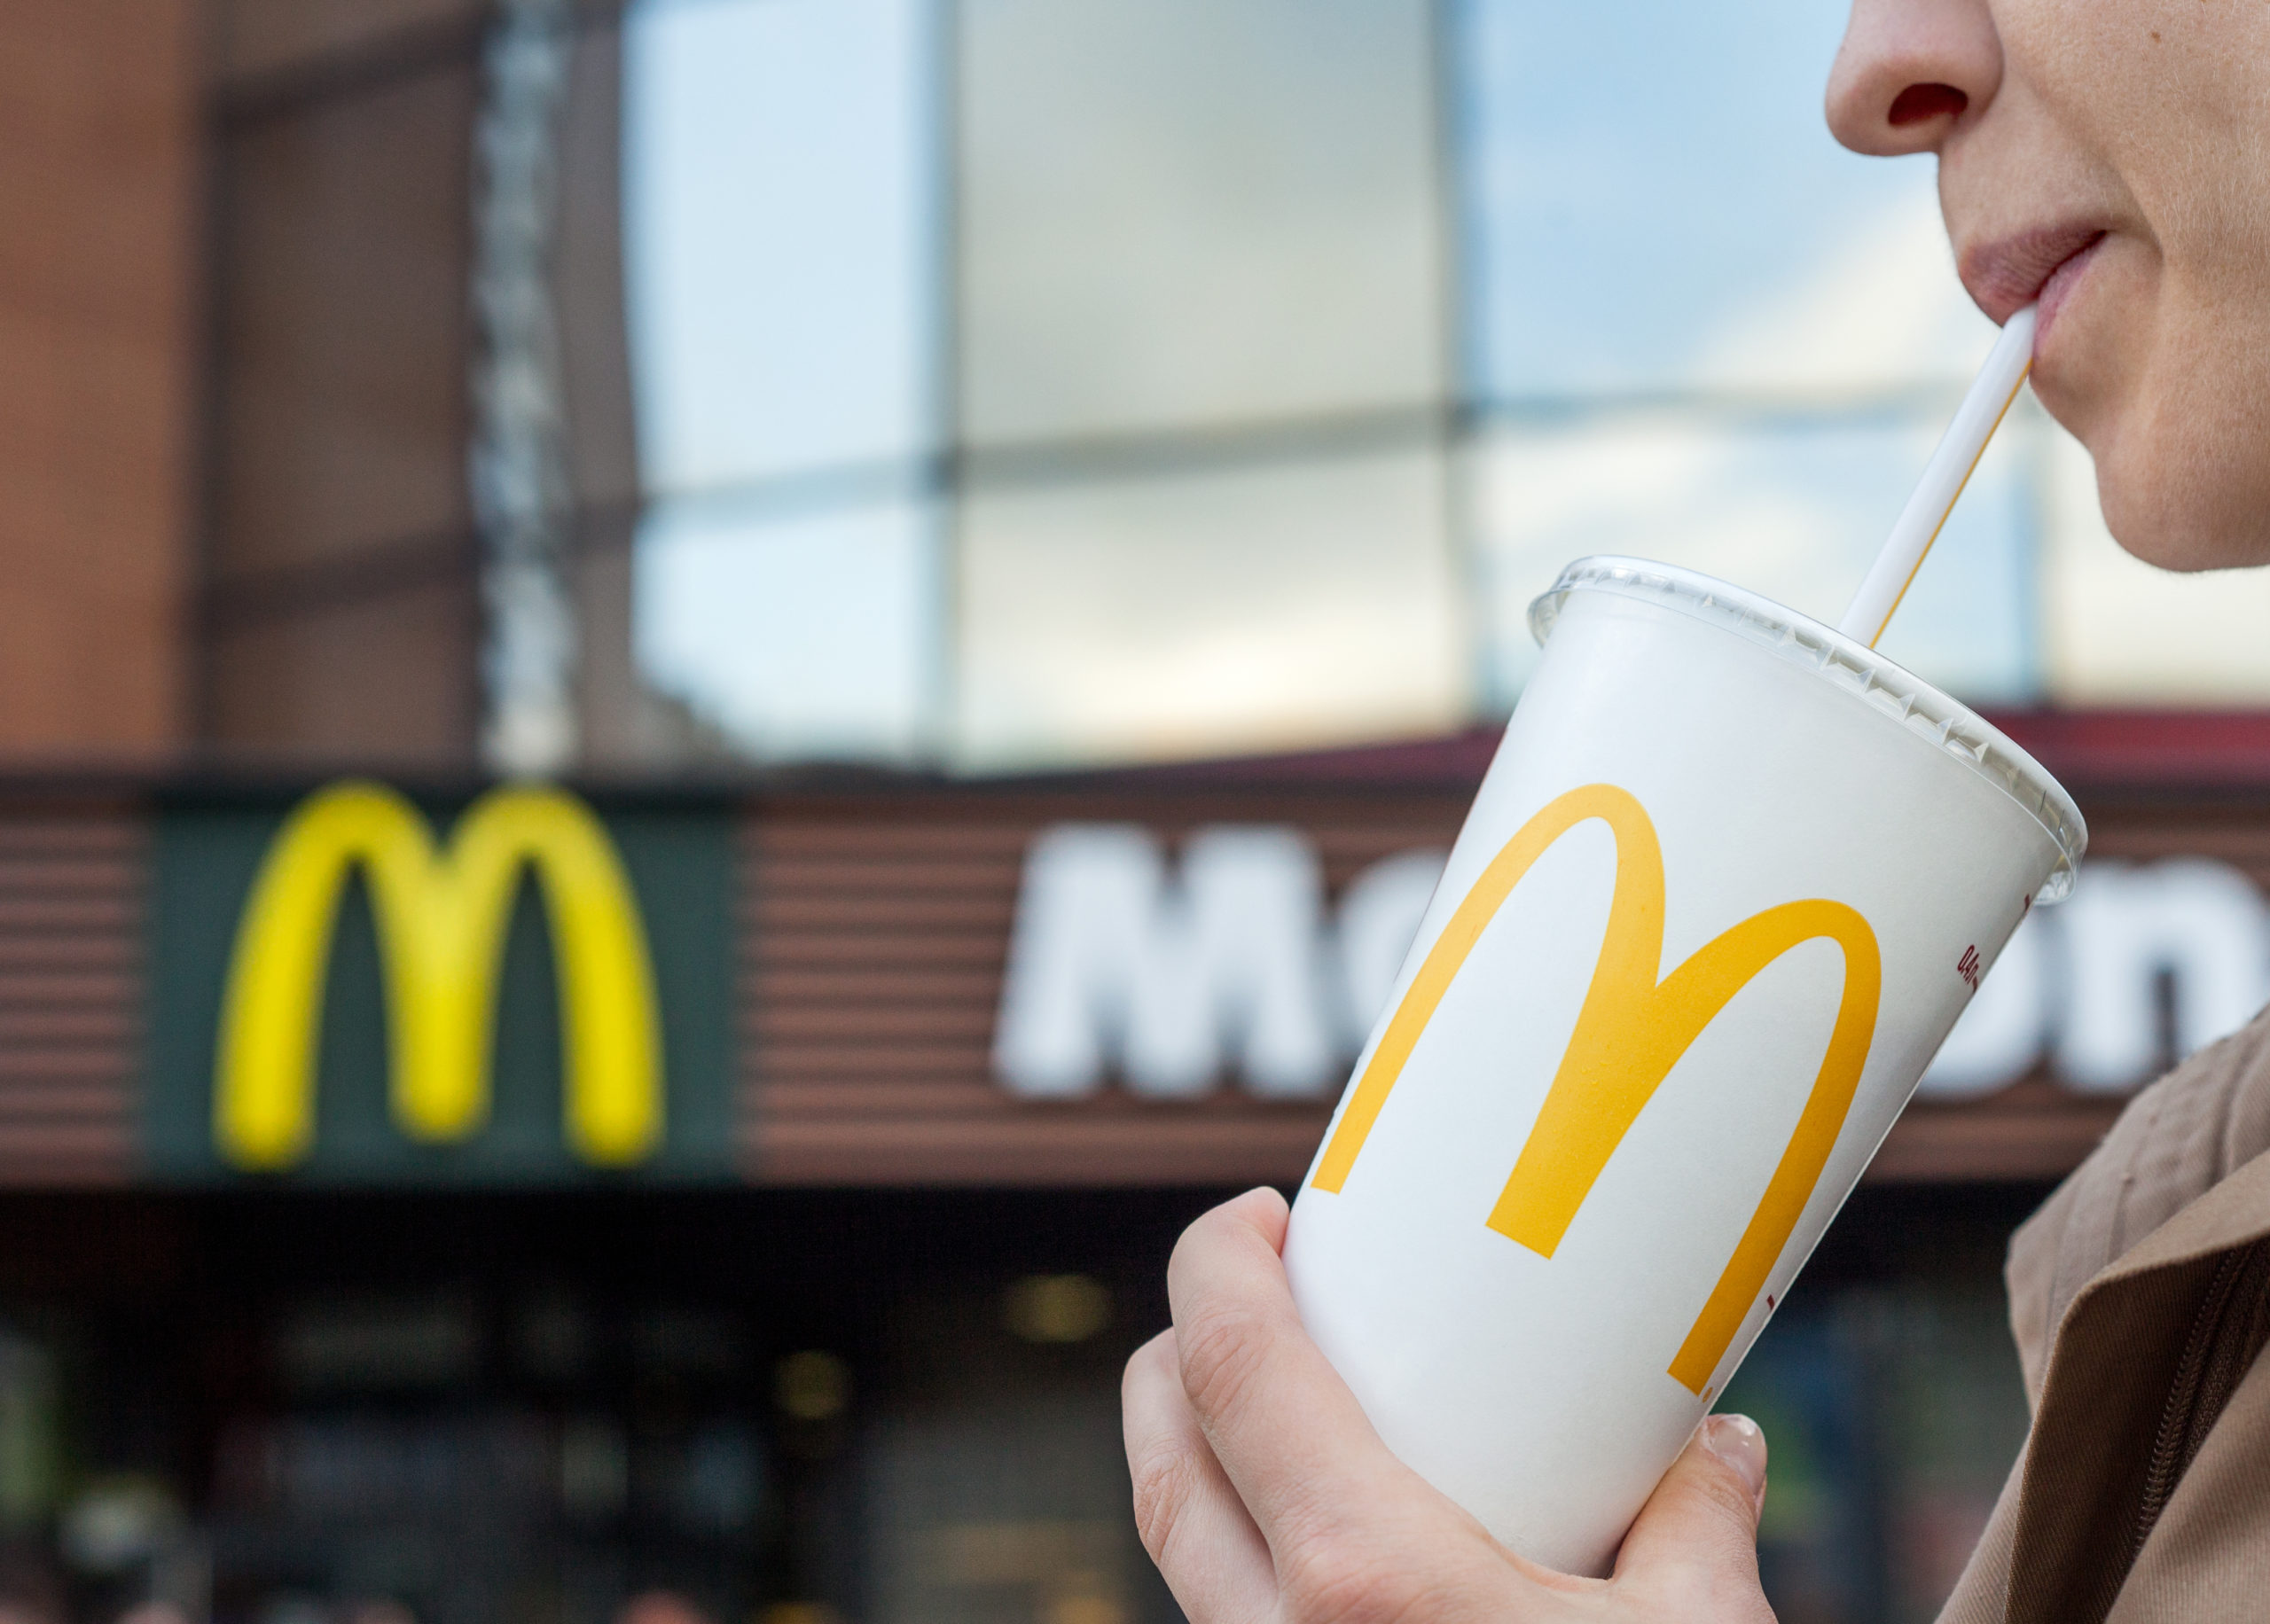 McDonald's Will Require Corporate Employees to be Vaccinated